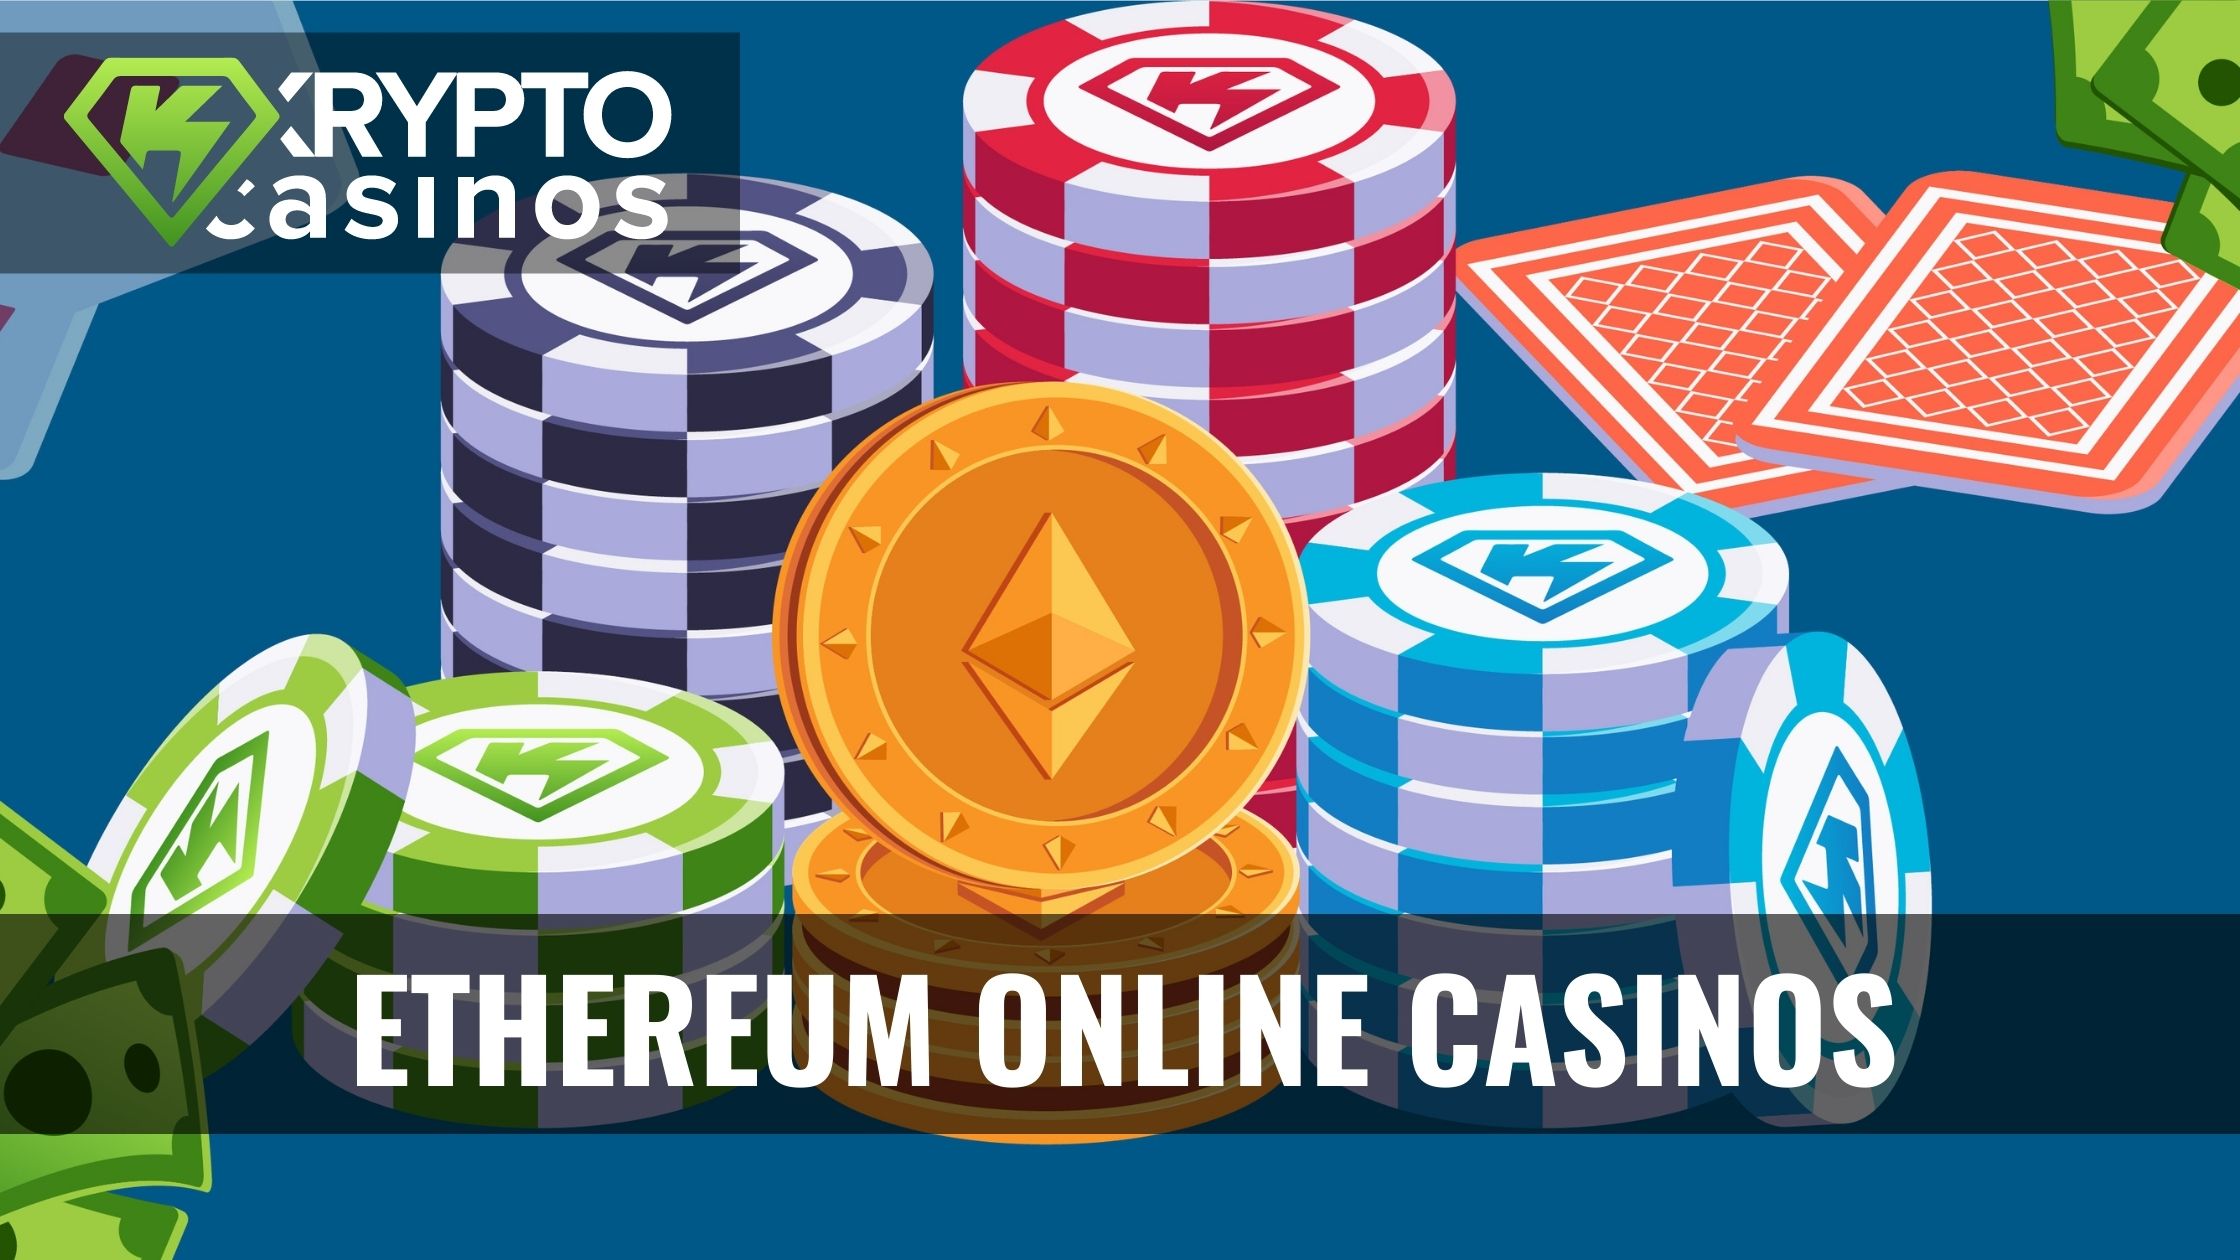 How To Become Better With ethereum casino In 10 Minutes